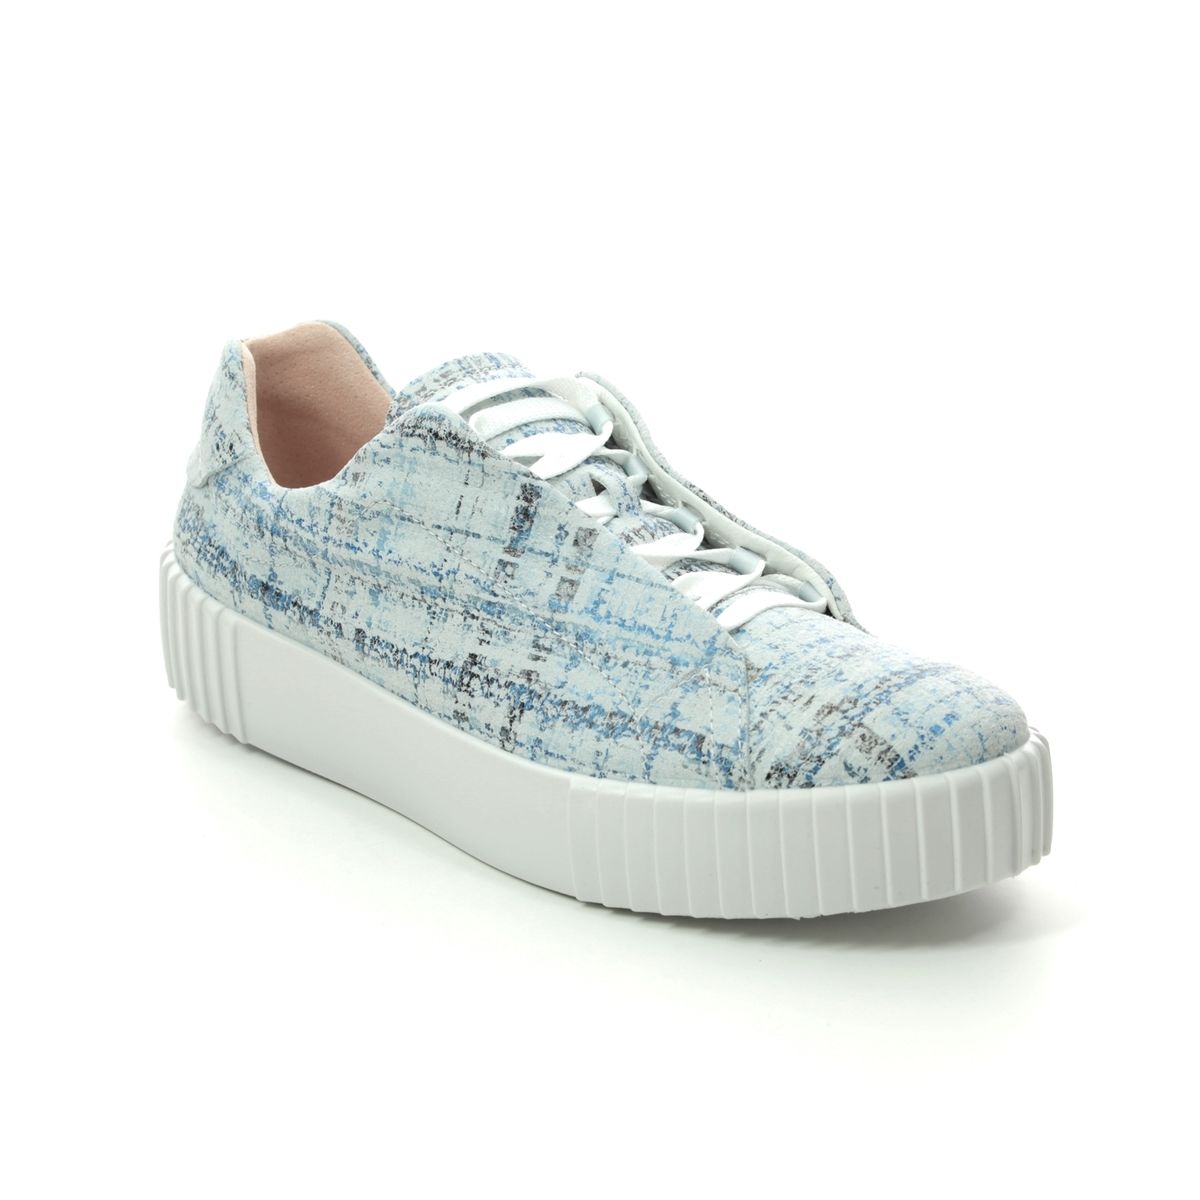 Westland Montreal S 03 Blue multi Womens trainers 14203-254012 in a Tartan Leather in Size 38